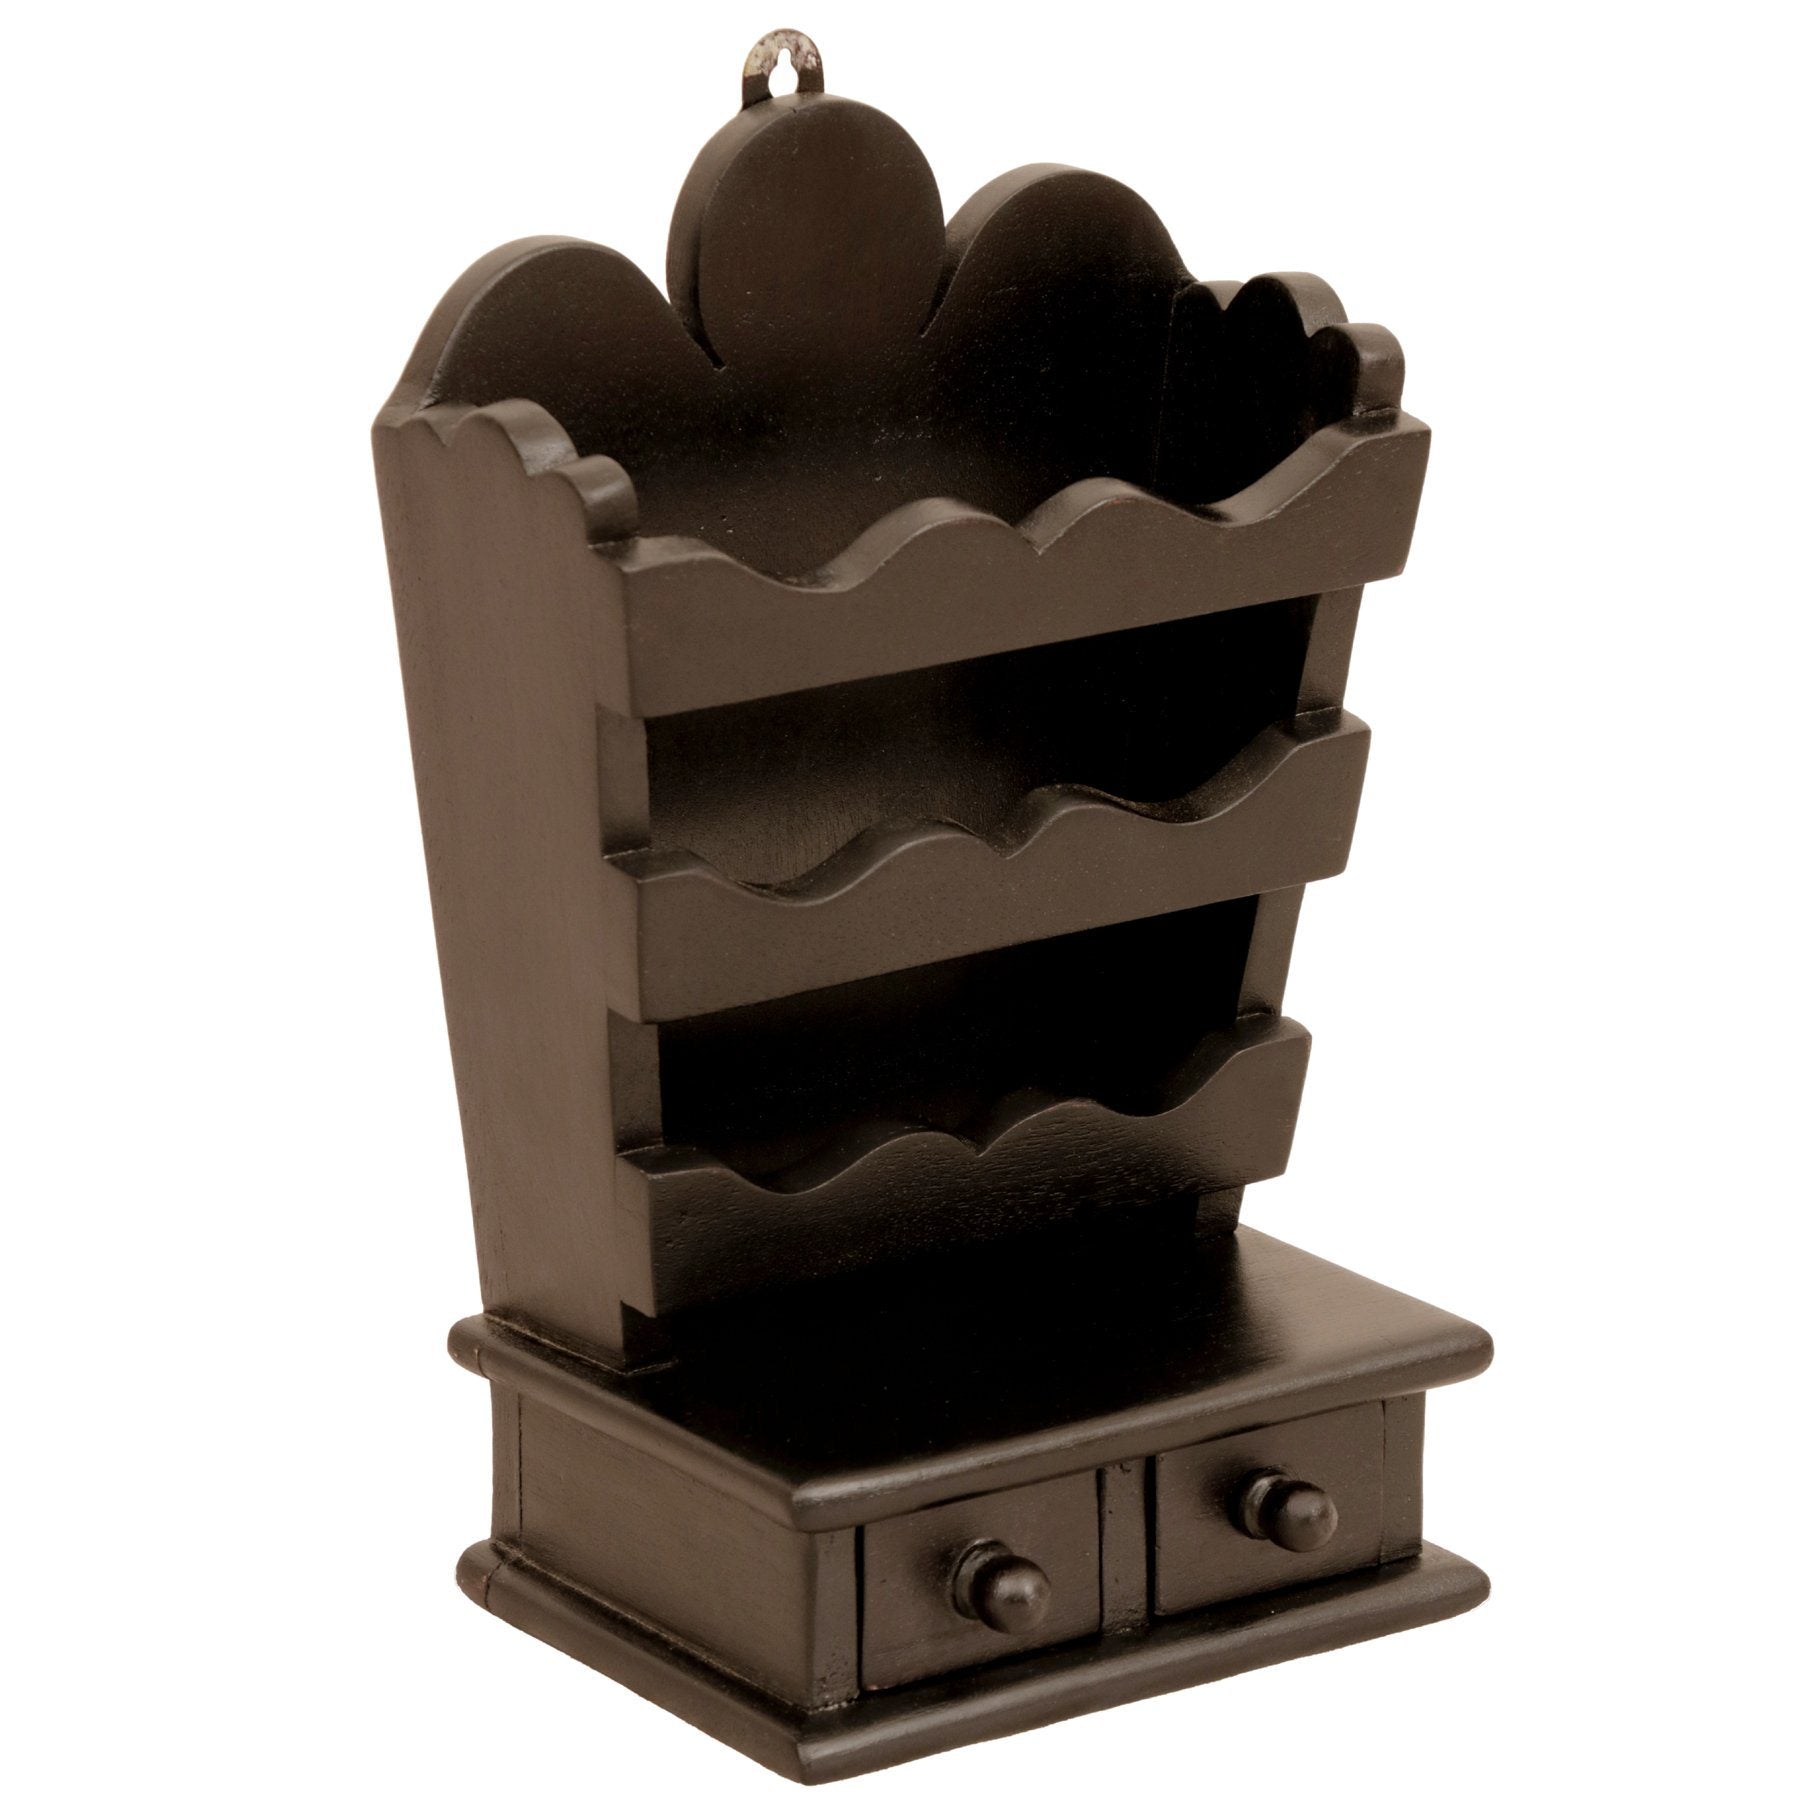 Black Flower Design Wall Hanging with 2 Drawers Paper Holder